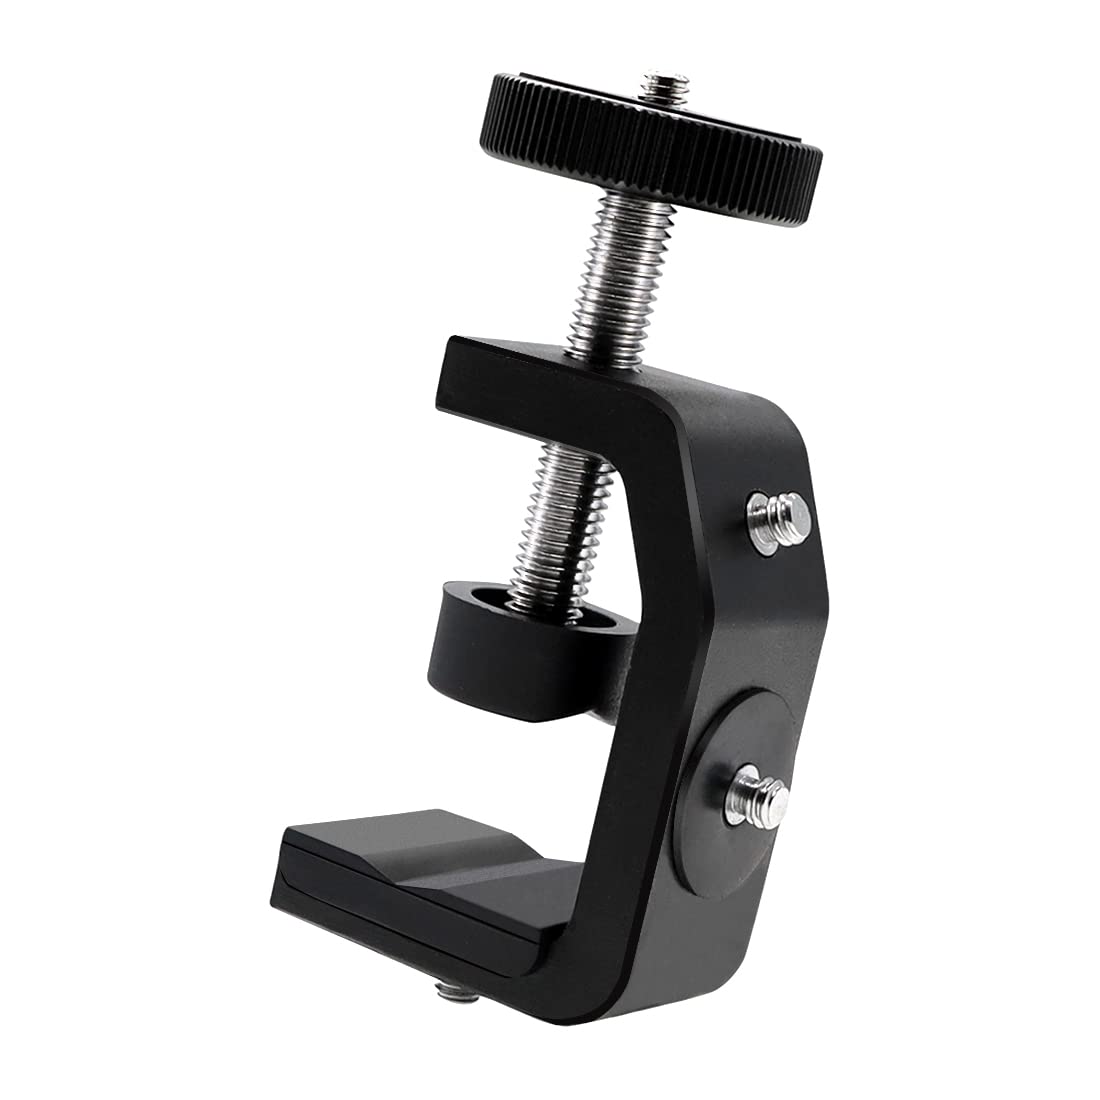 SLOW DOLPHIN Photography C Clamp Camera Clamp Mount with 1/4" Screw for Photo Studio Video DSLR,Cameras, Light Stand, Desk, Rods, Hooks, Shelves, Cross Bars